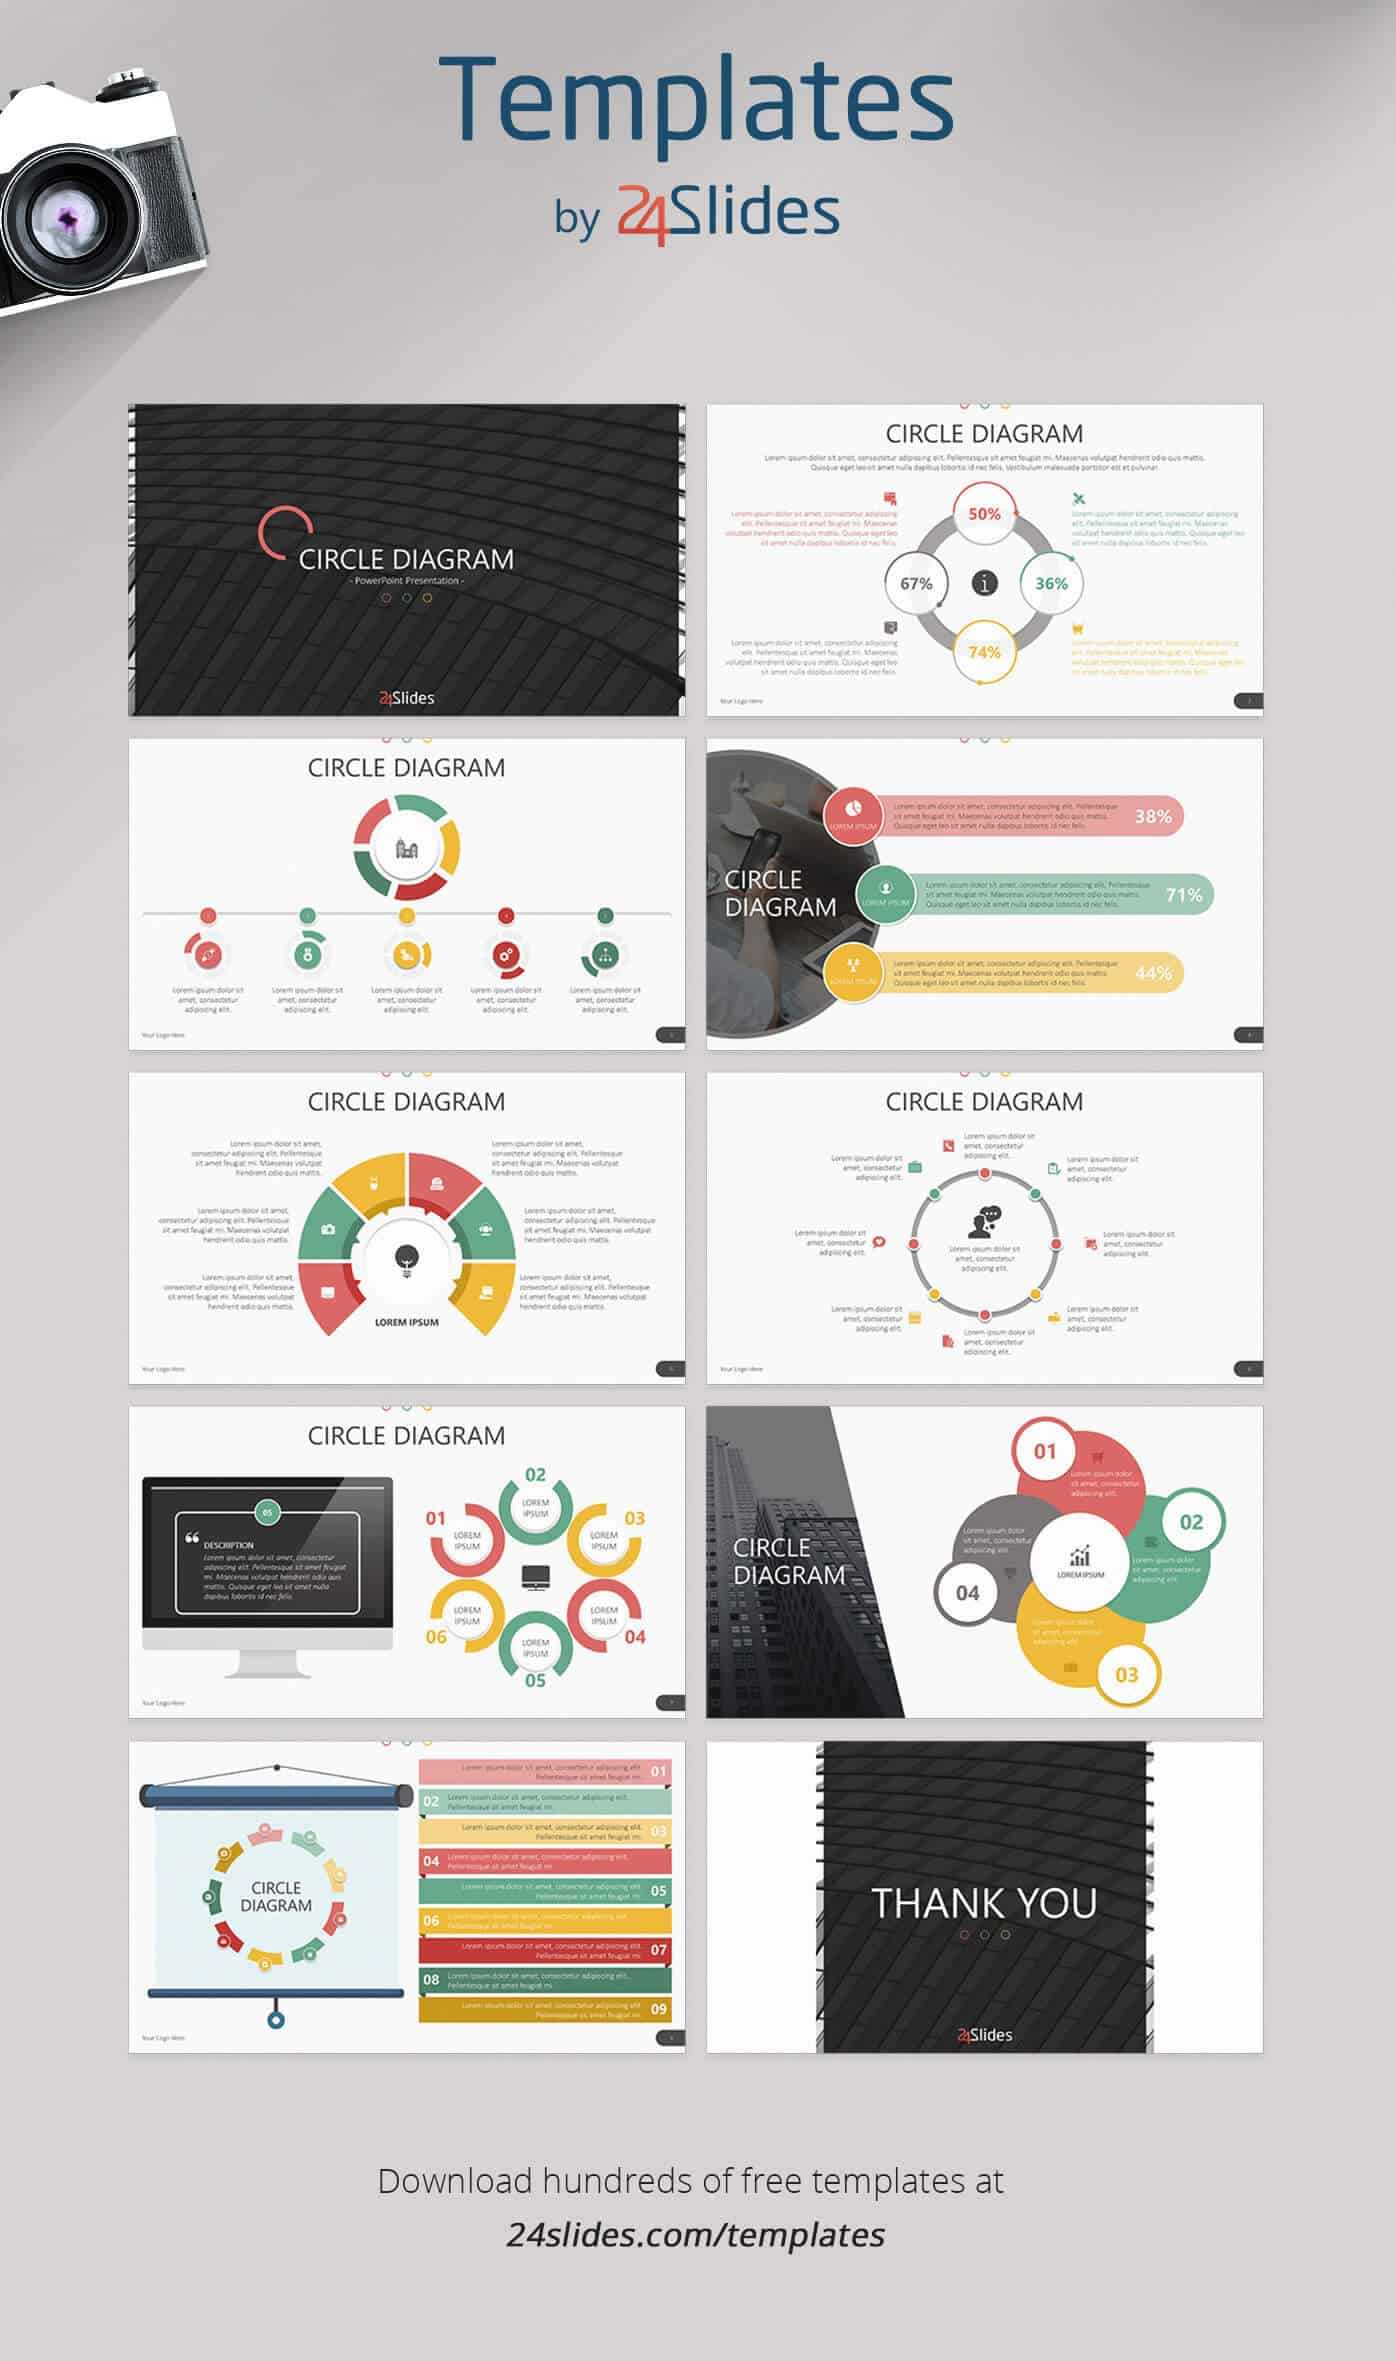 15 Fun And Colorful Free Powerpoint Templates | Present Better Throughout Powerpoint Slides Design Templates For Free